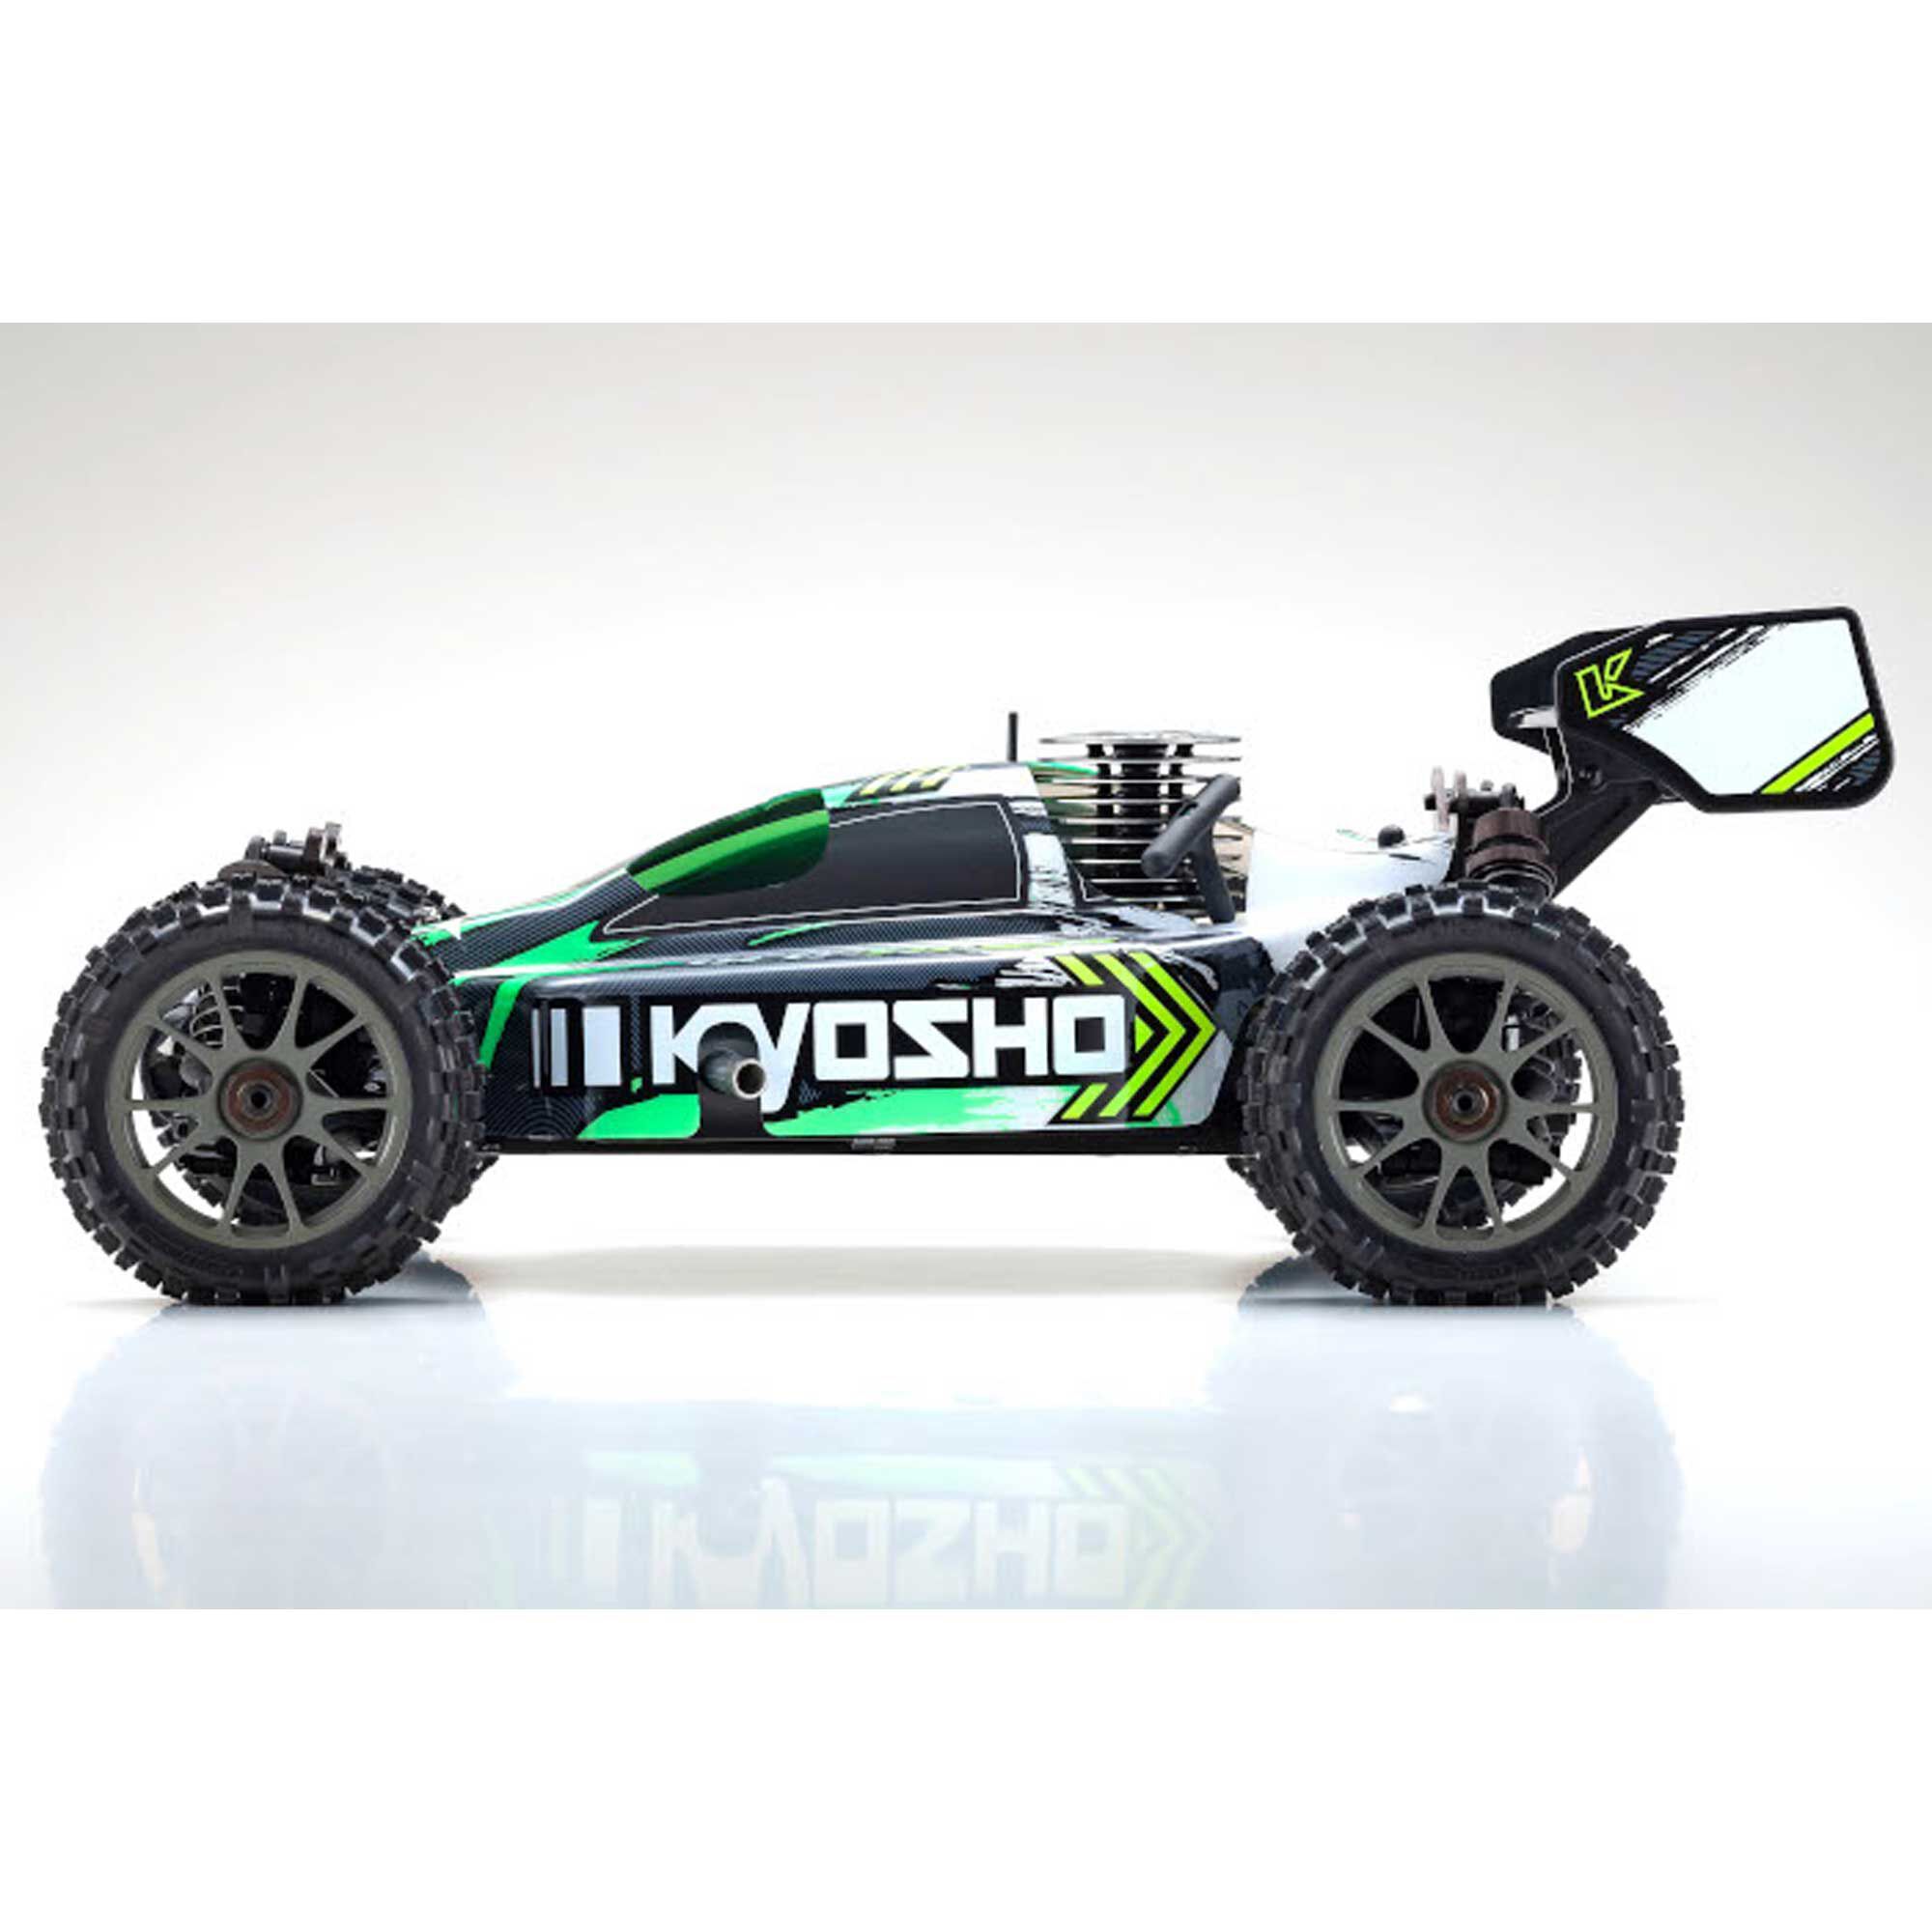 Kyosho Inferno Neo 3.0 1/8 Buggy Chassis Roller NonRTR Nitro Verbrenner 